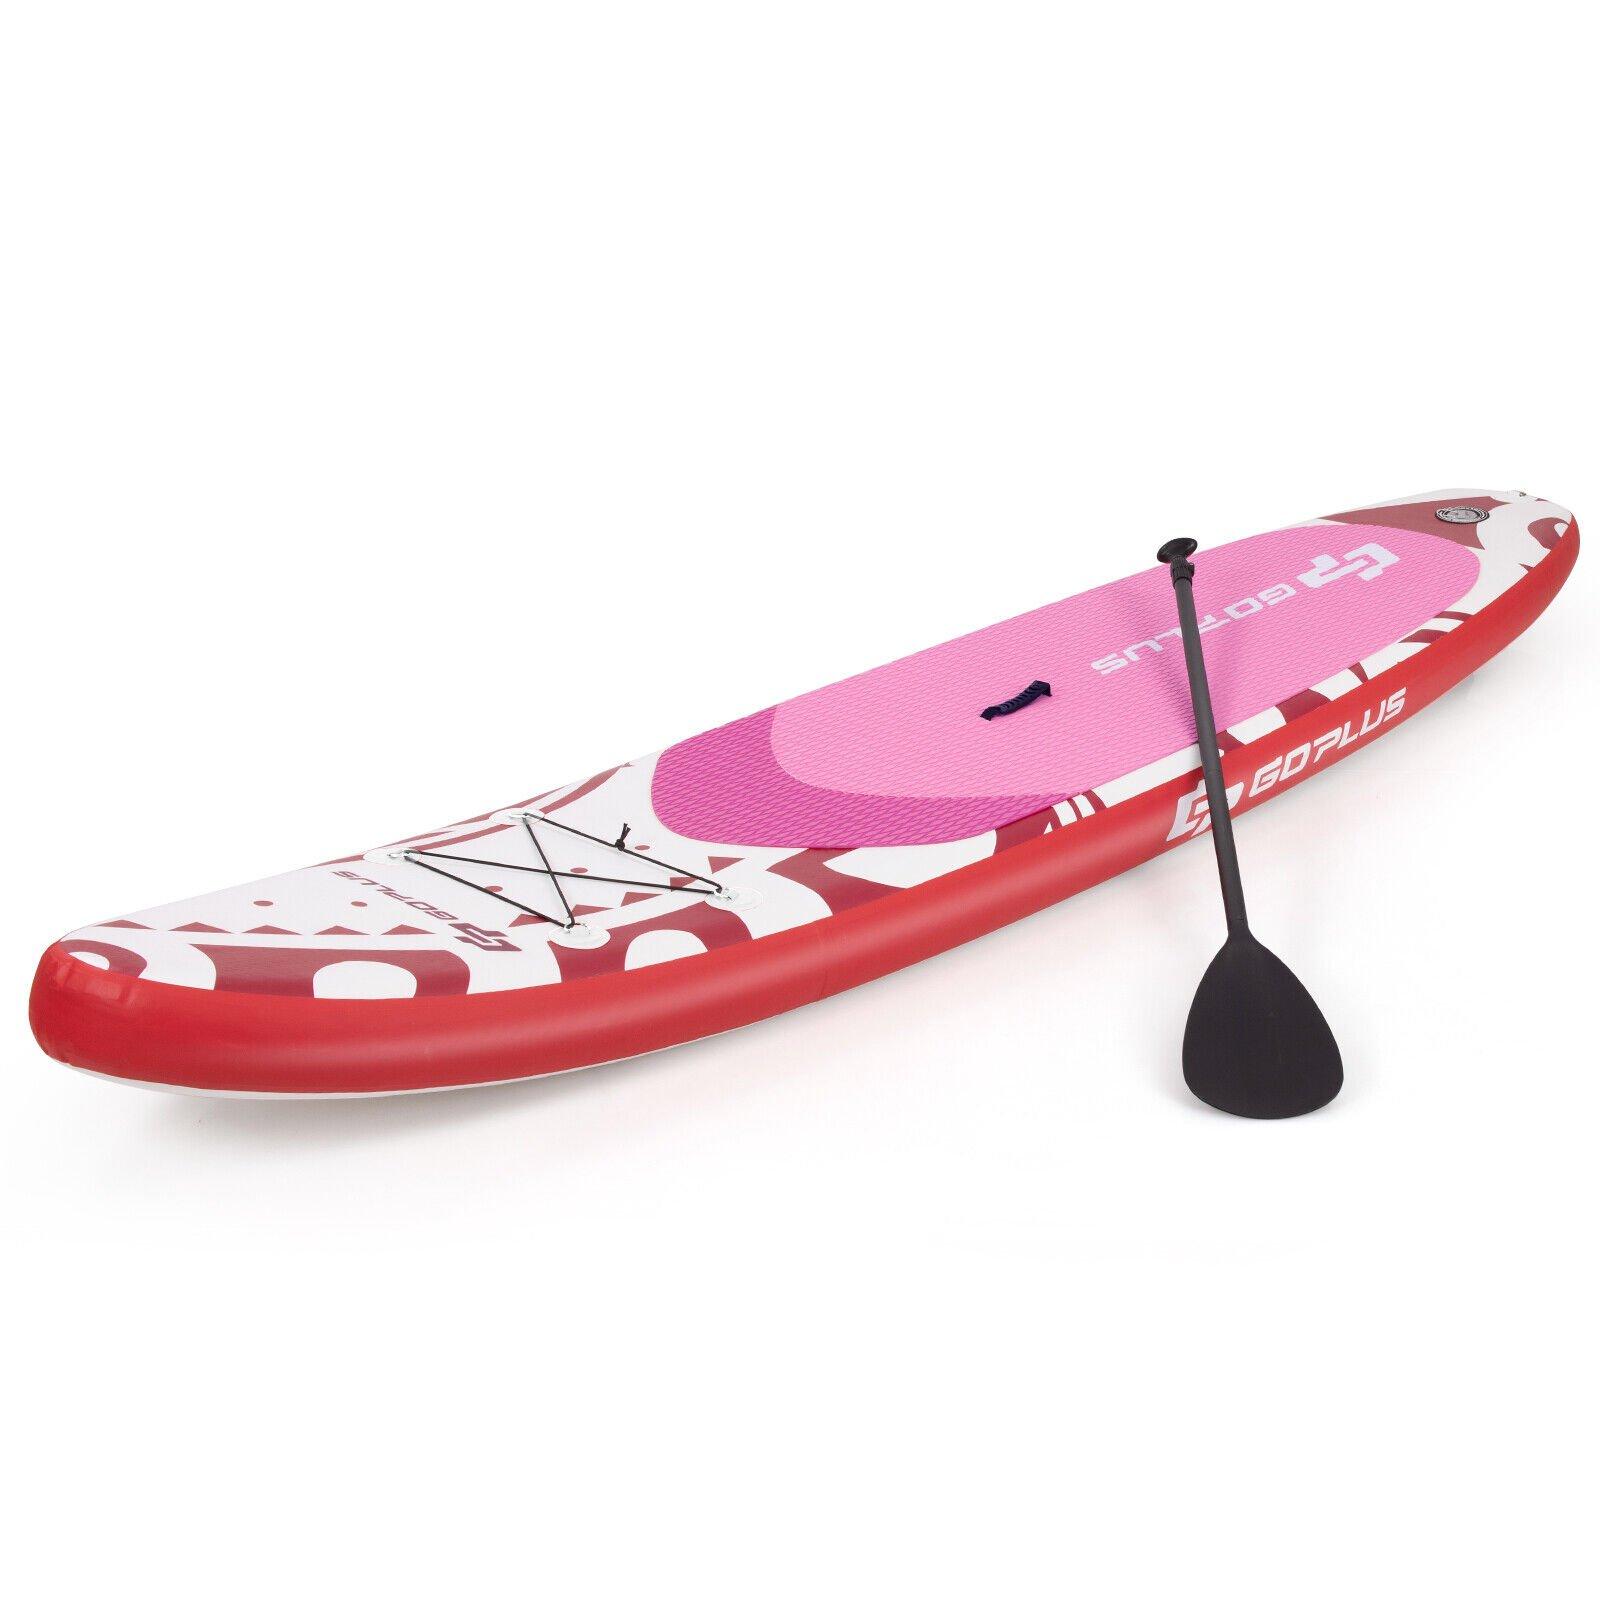 11FT Inflatable Stand Up Paddle Board Lightweight 76cm Thick SUP W/Carry Bag